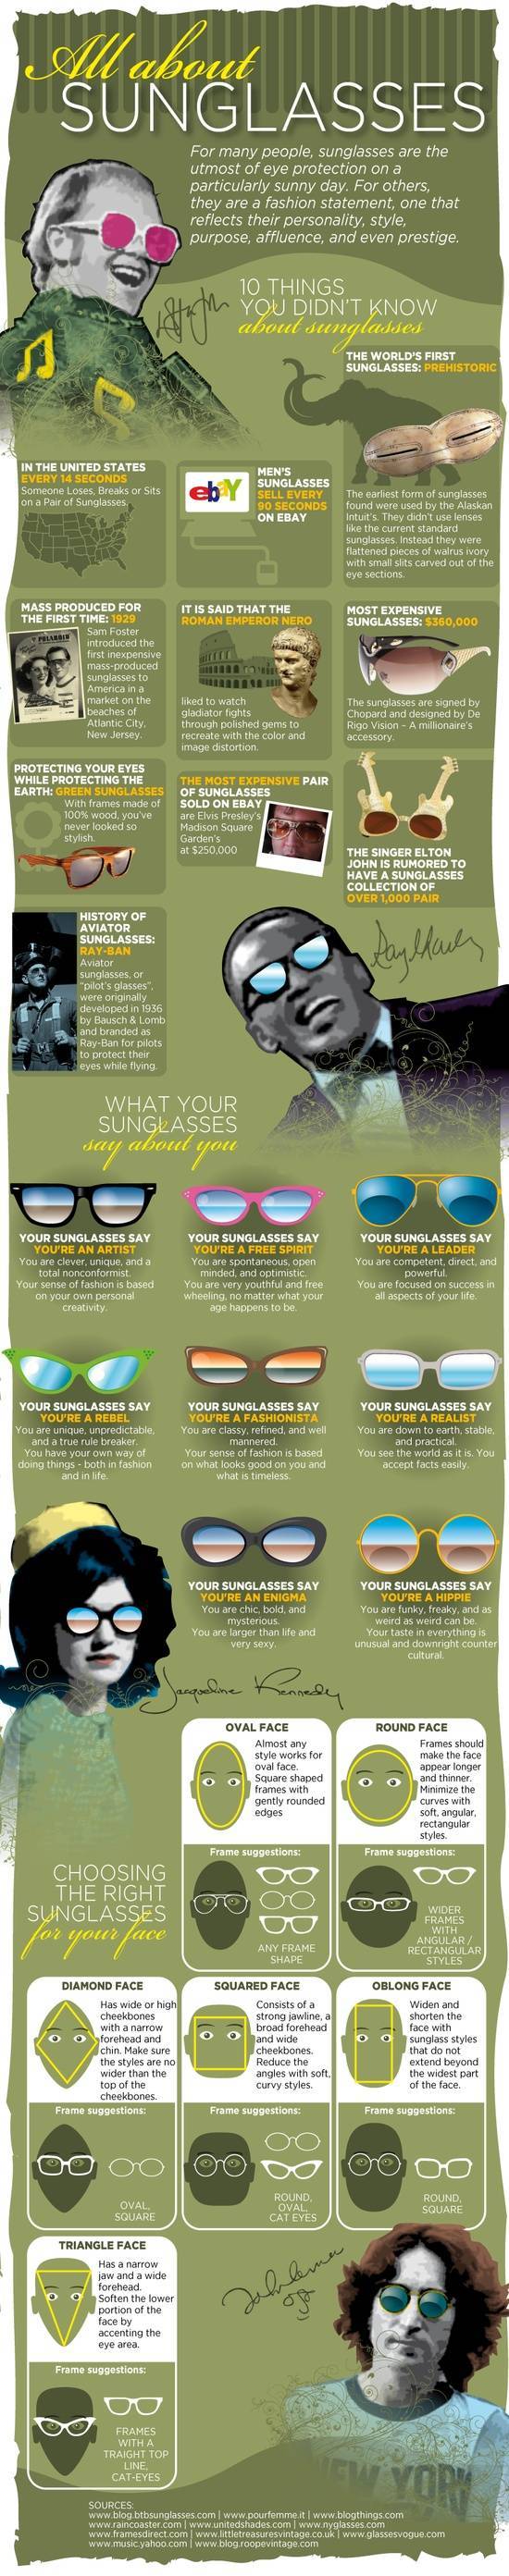 All-about-sunglasses